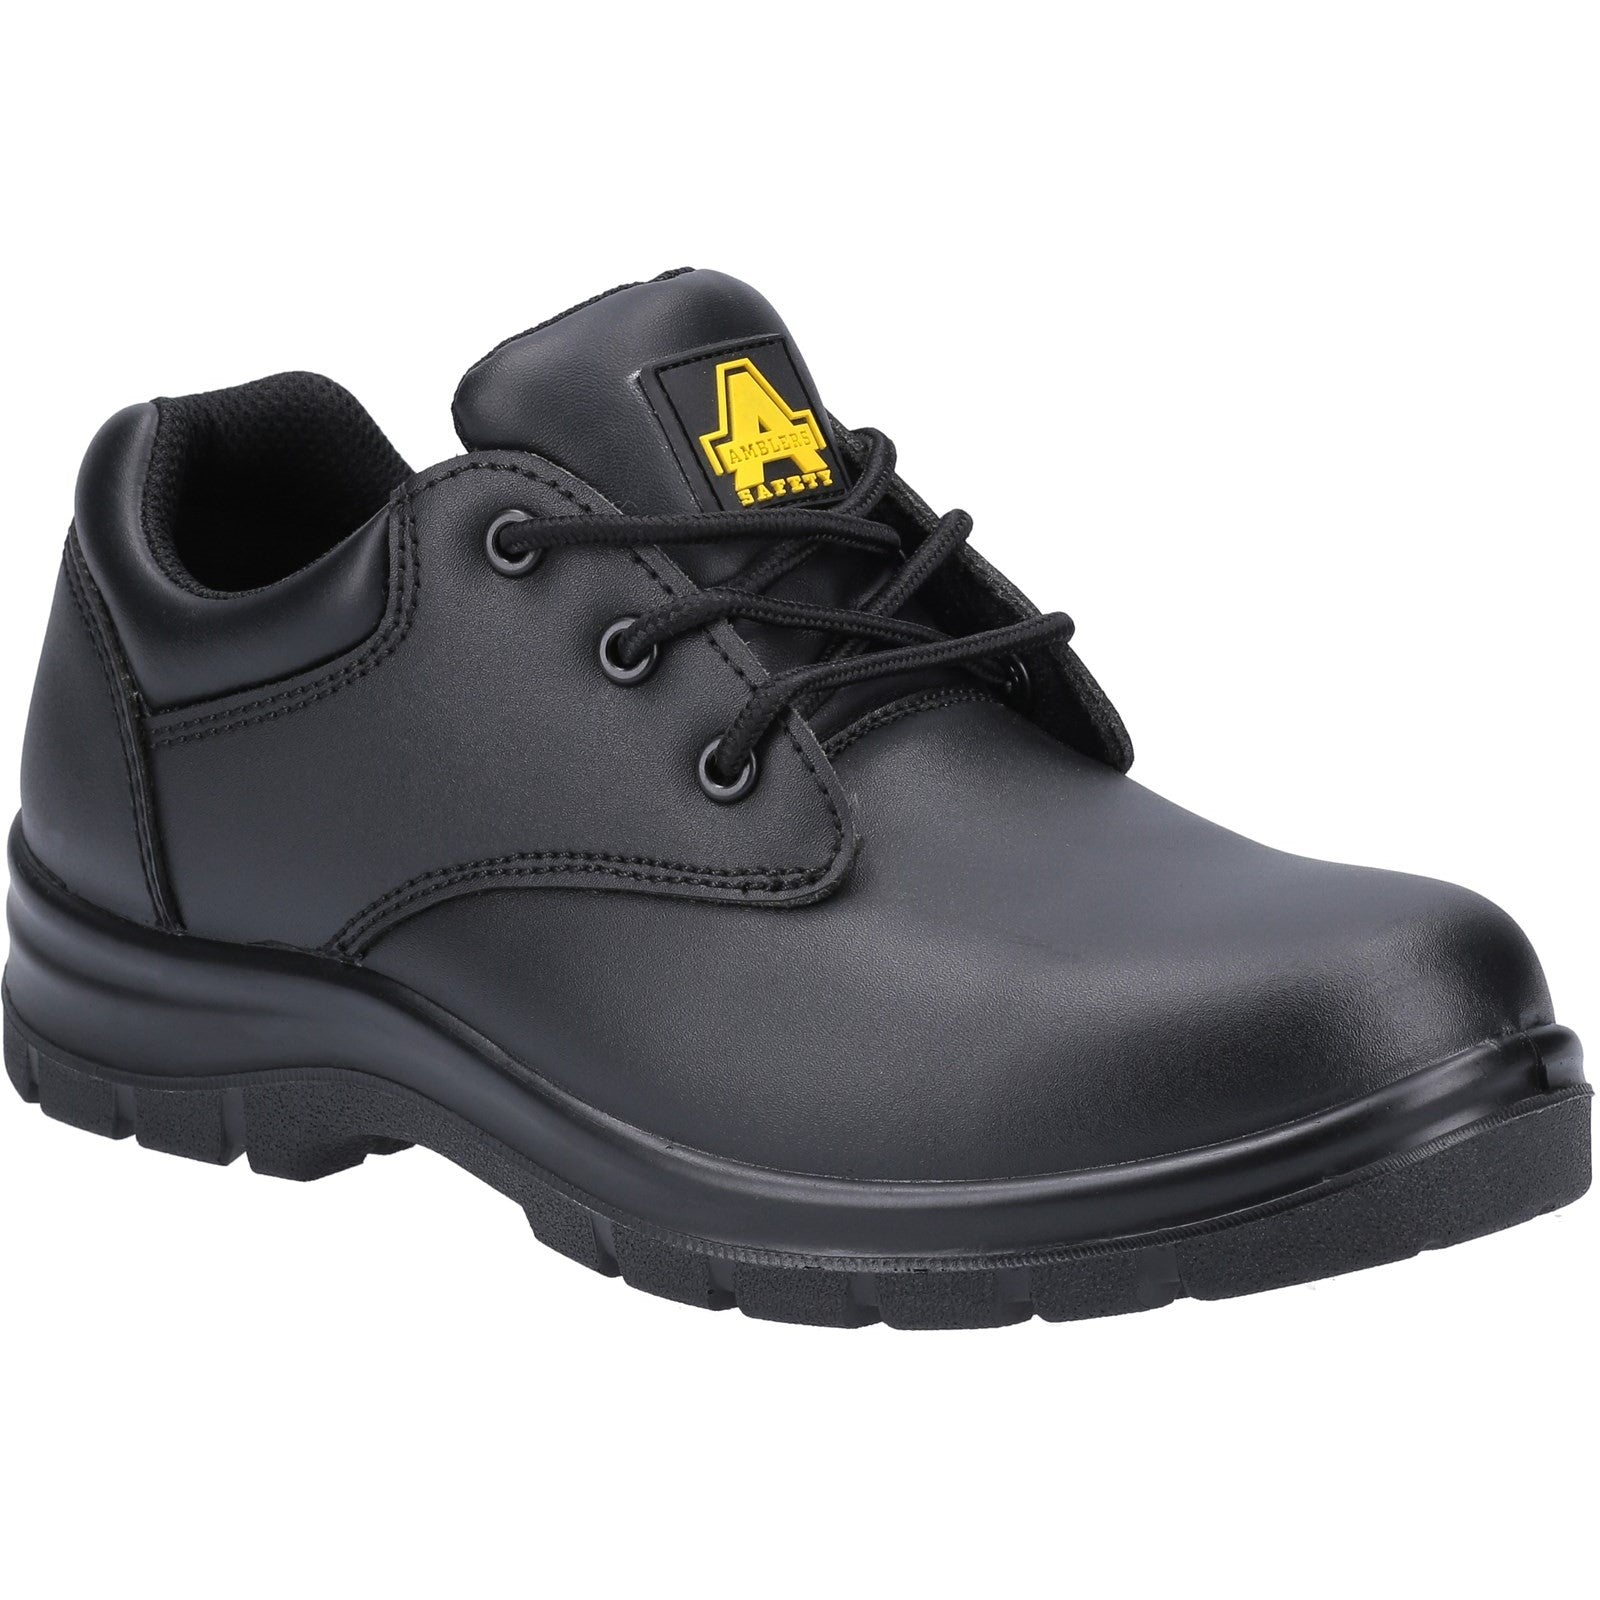 Amblers AS715C Safety Shoes